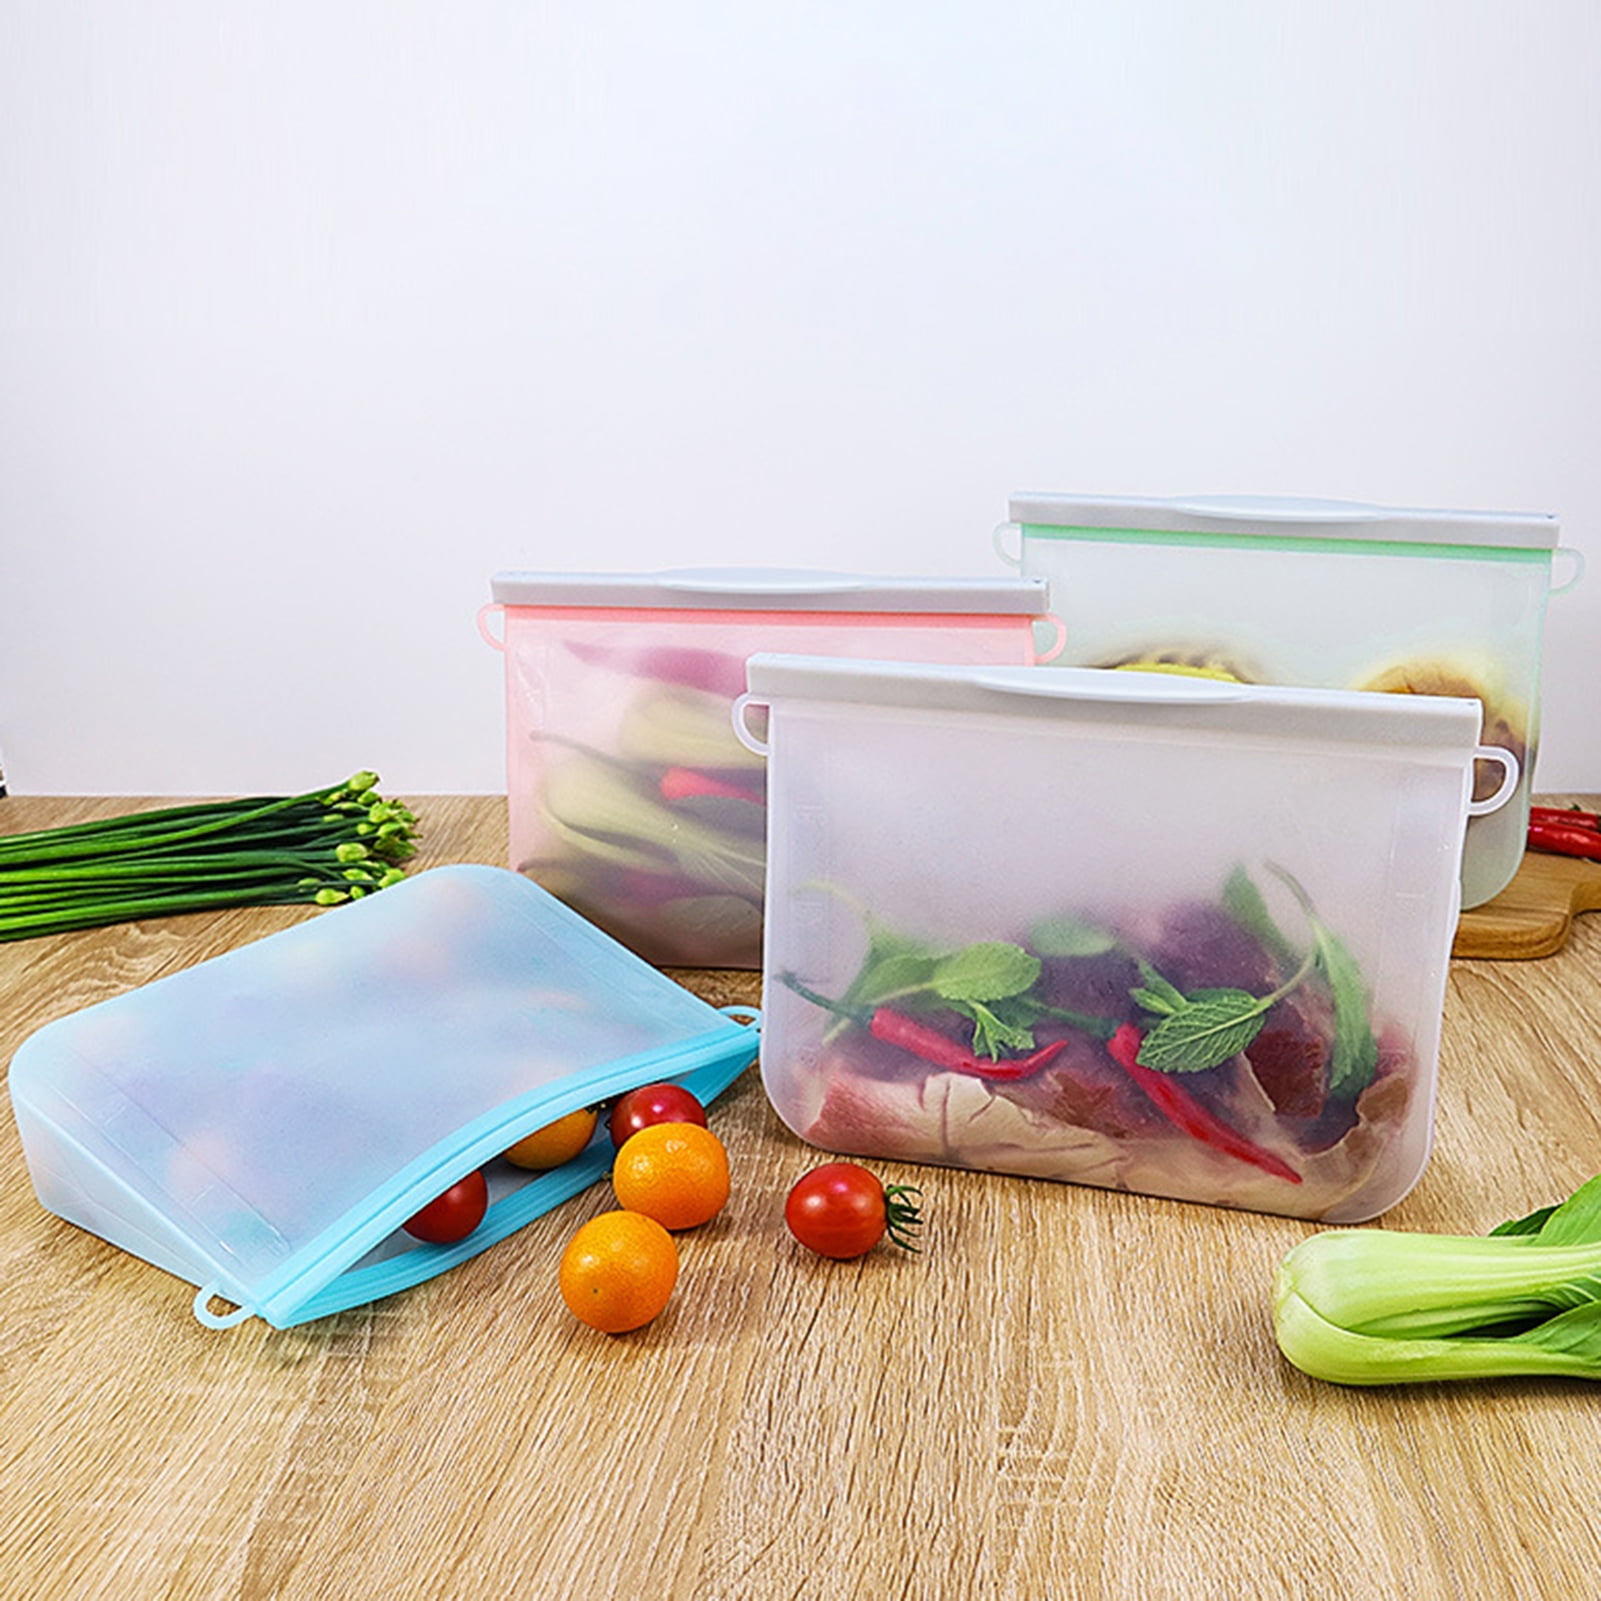 AECHY Food-grade Silicone Food Storage Bag Set with 3 Colors – Aechy